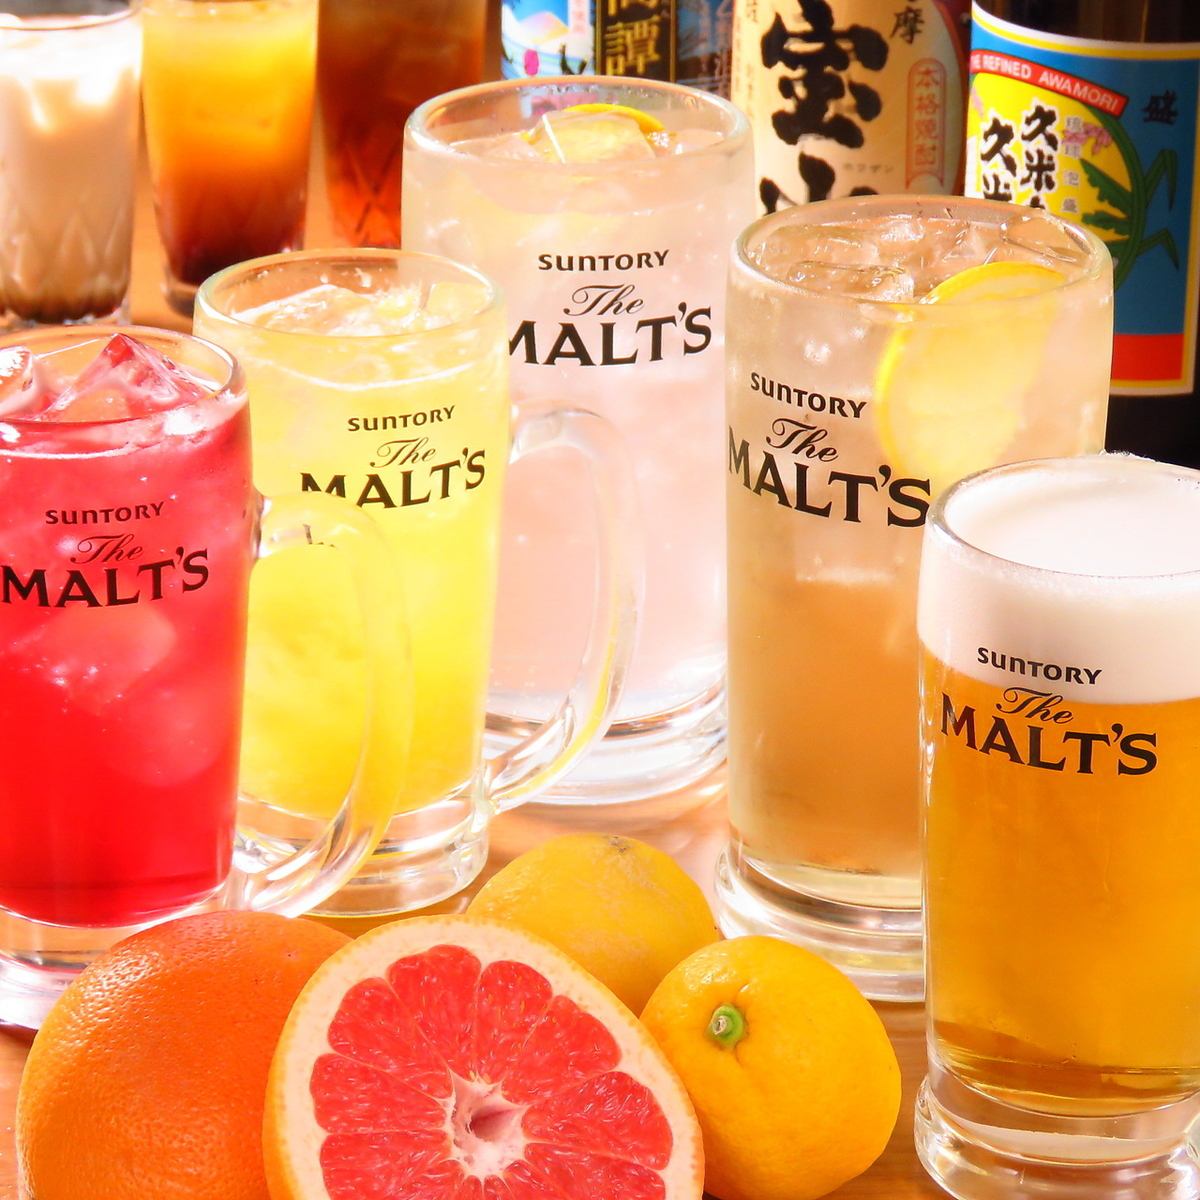 [All-you-can-drink] Draft beer is also OK! All-you-can-drink for 2 hours from 1180 yen